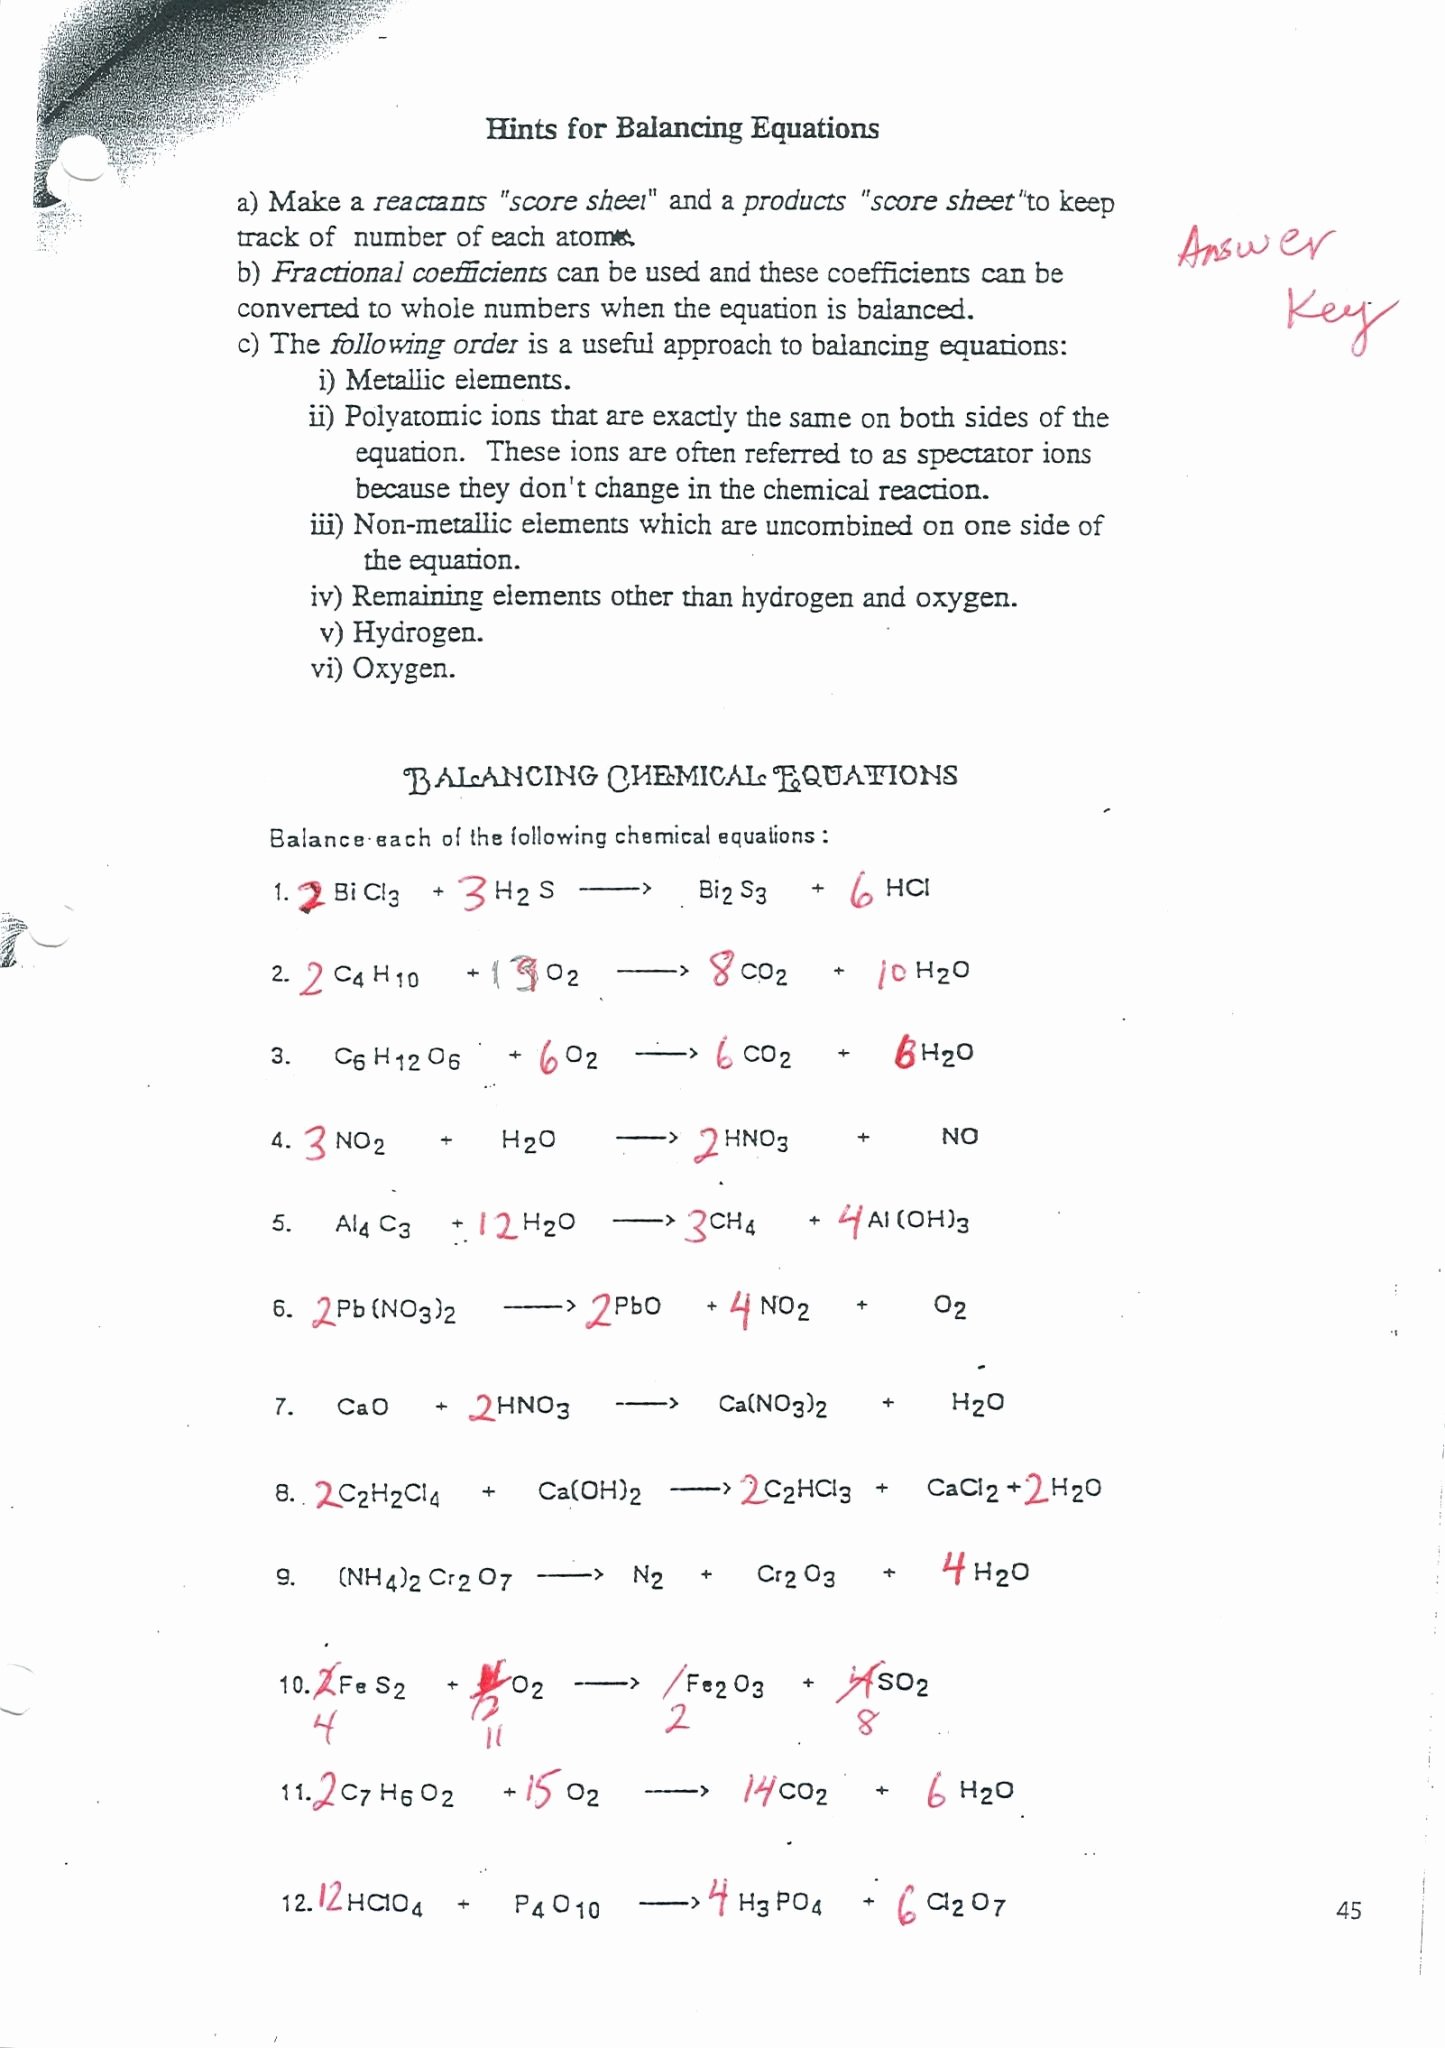 Balancing Equation Worksheet with Answers Unique Balancing Chemical Equations Worksheet Answer Key